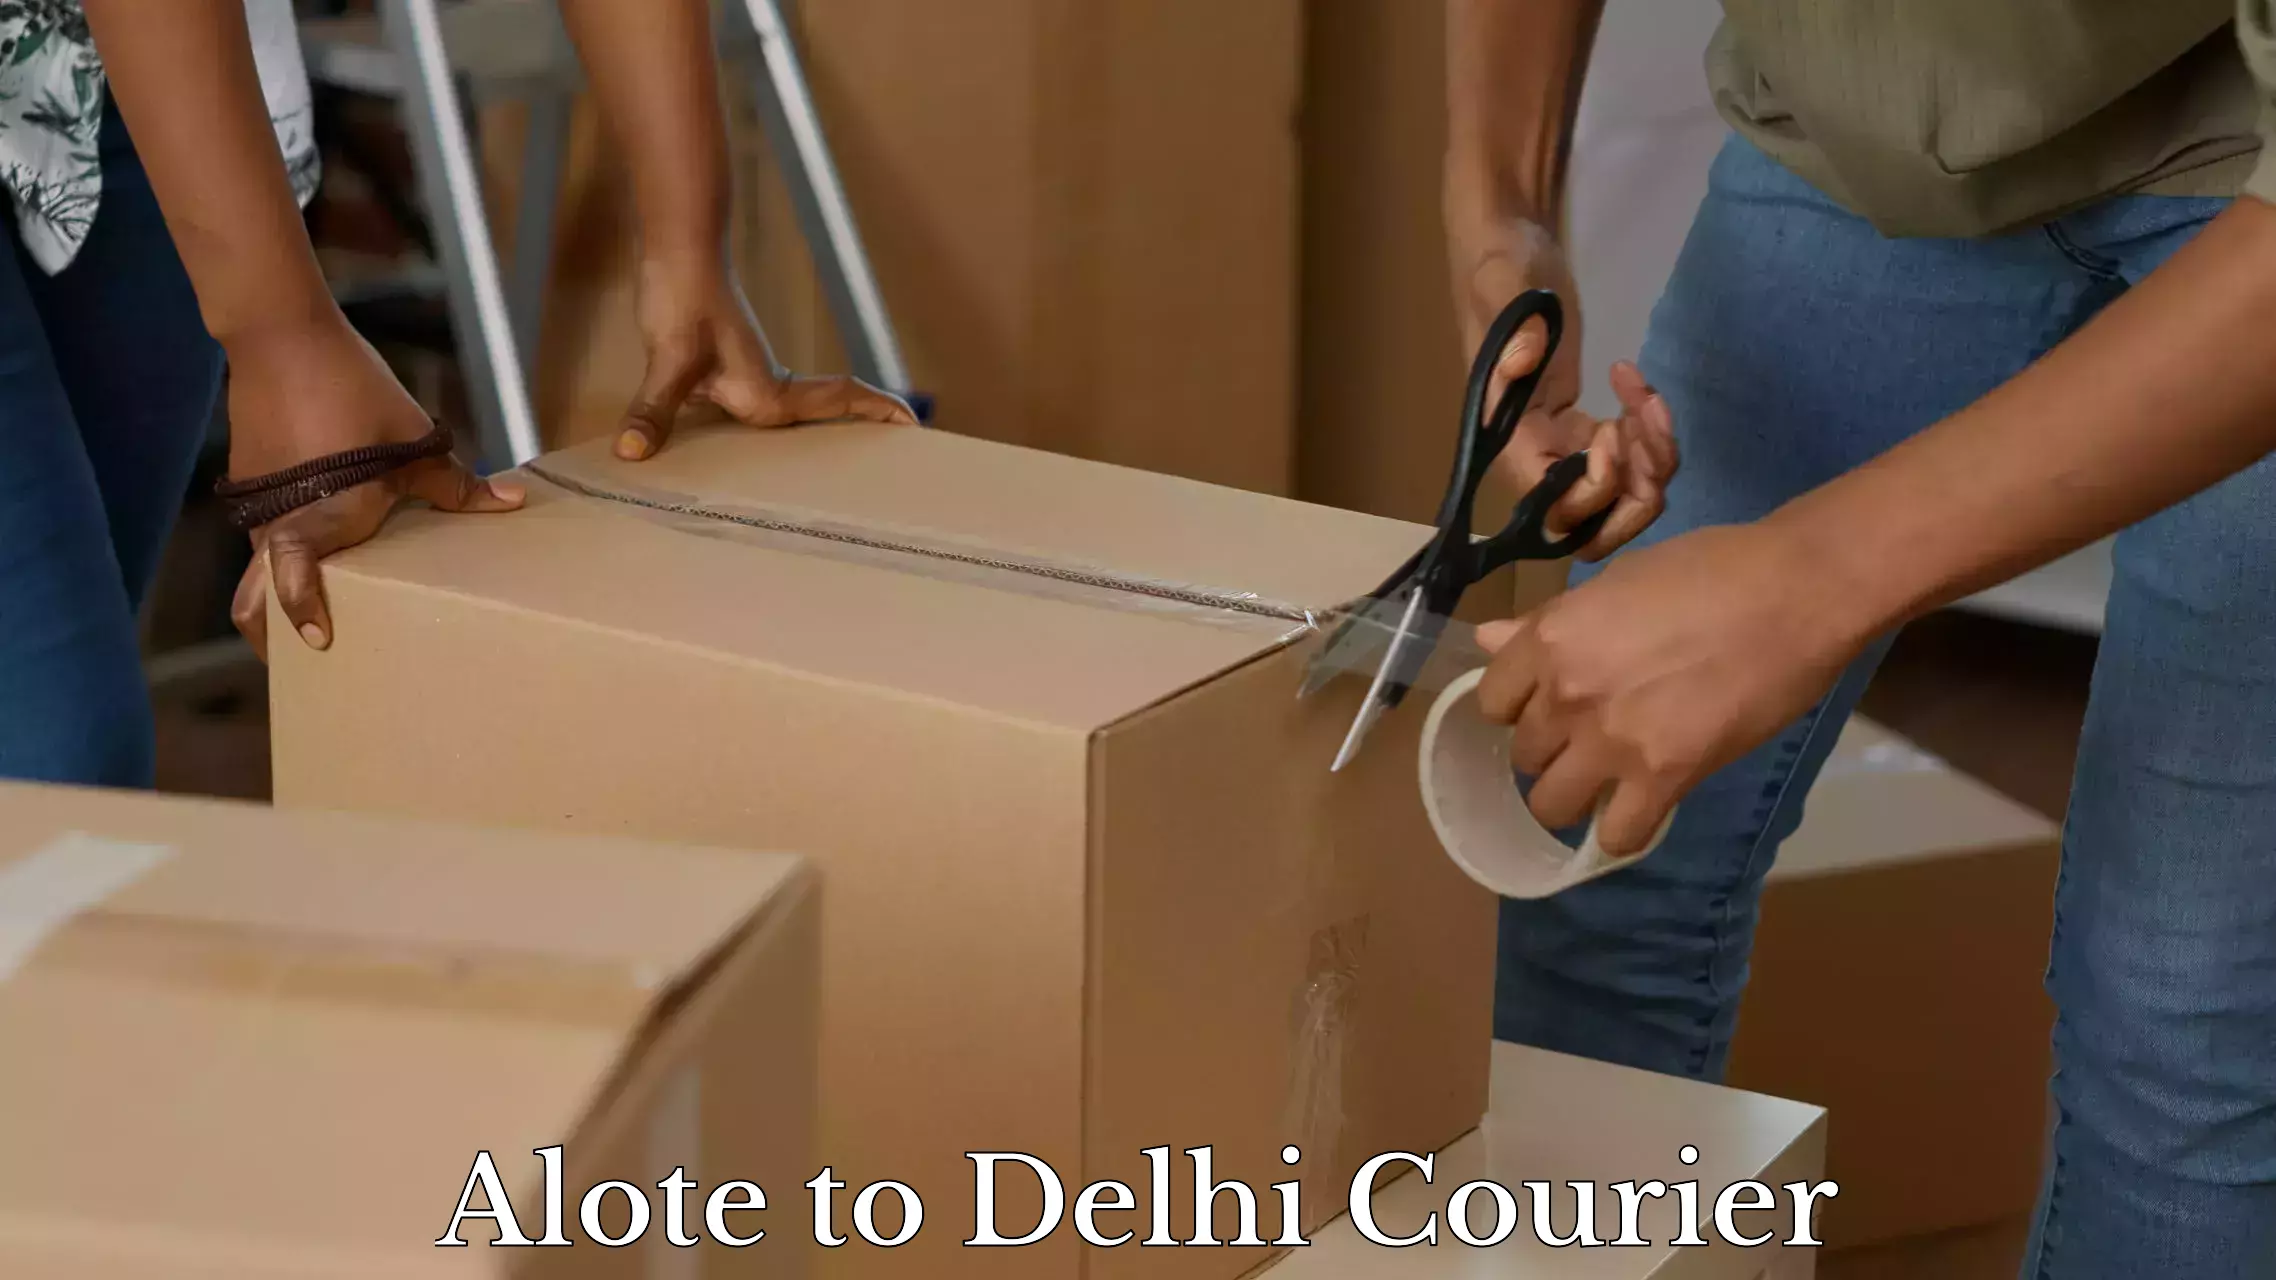 Luggage shipment specialists Alote to Jhilmil